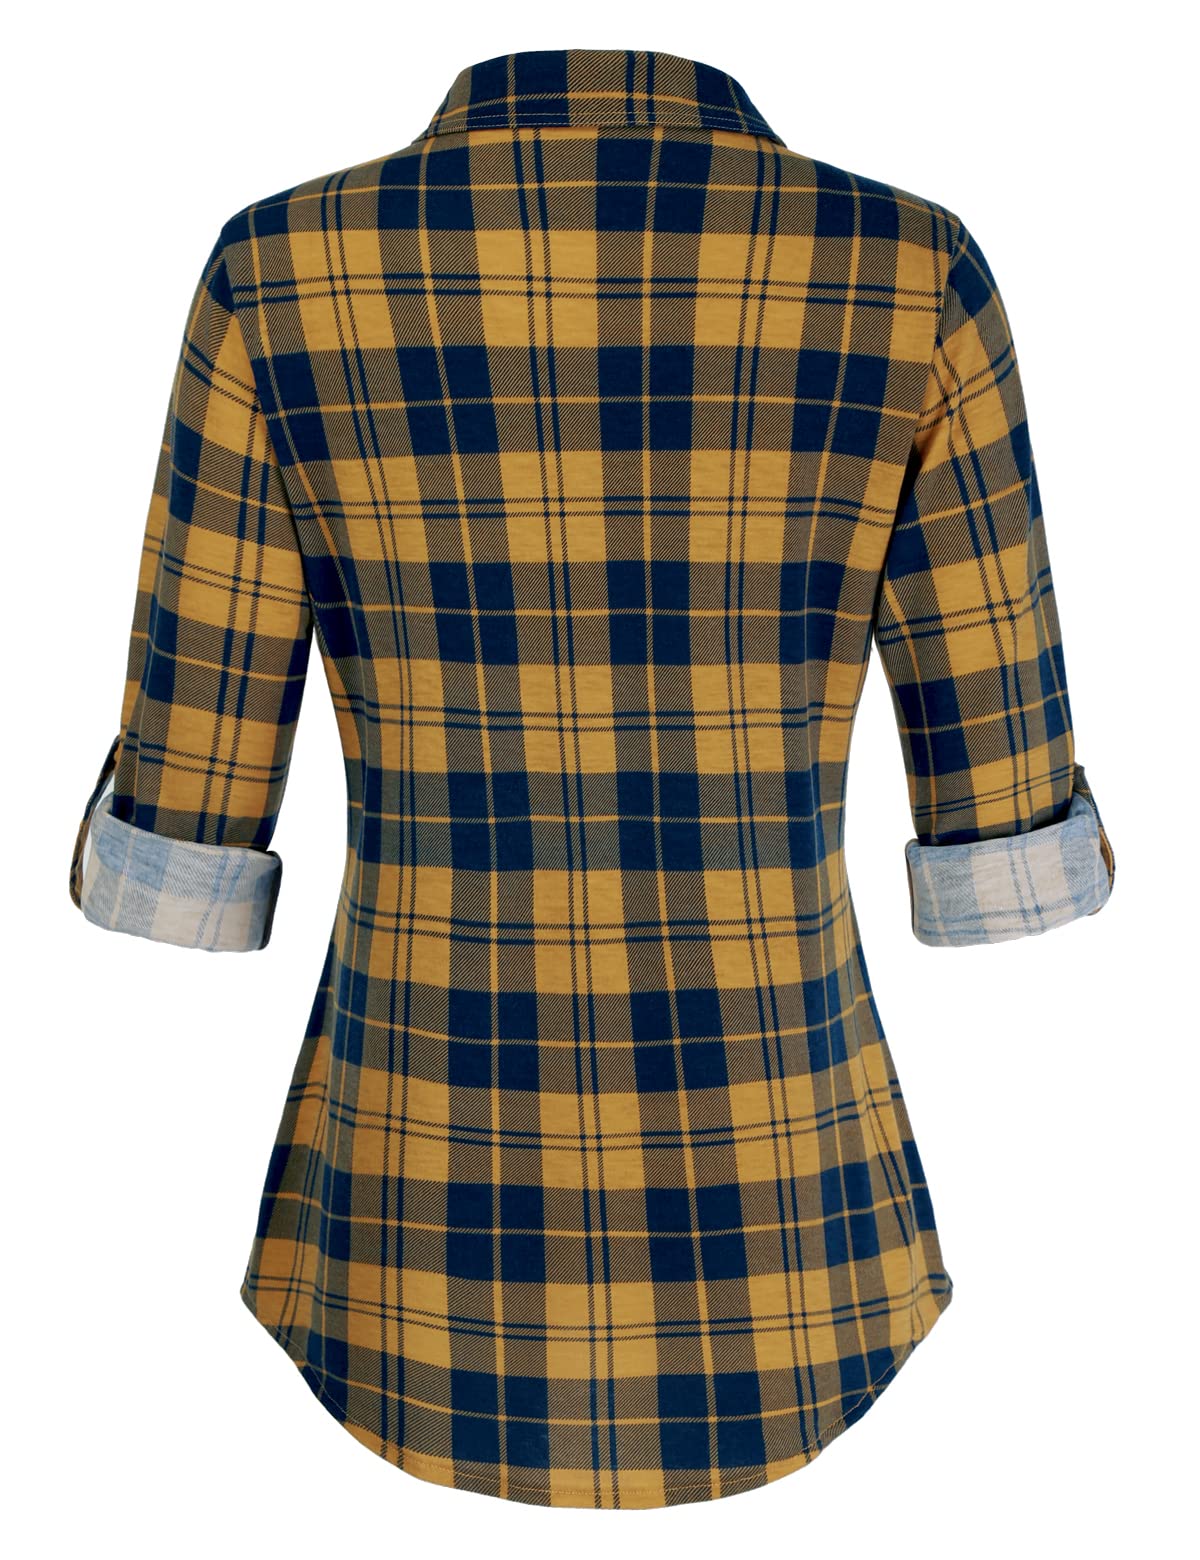 DJT Roll Up Long Sleeve Yellow Navy Plaid Women’s Collared Button Down Plaid Shirt